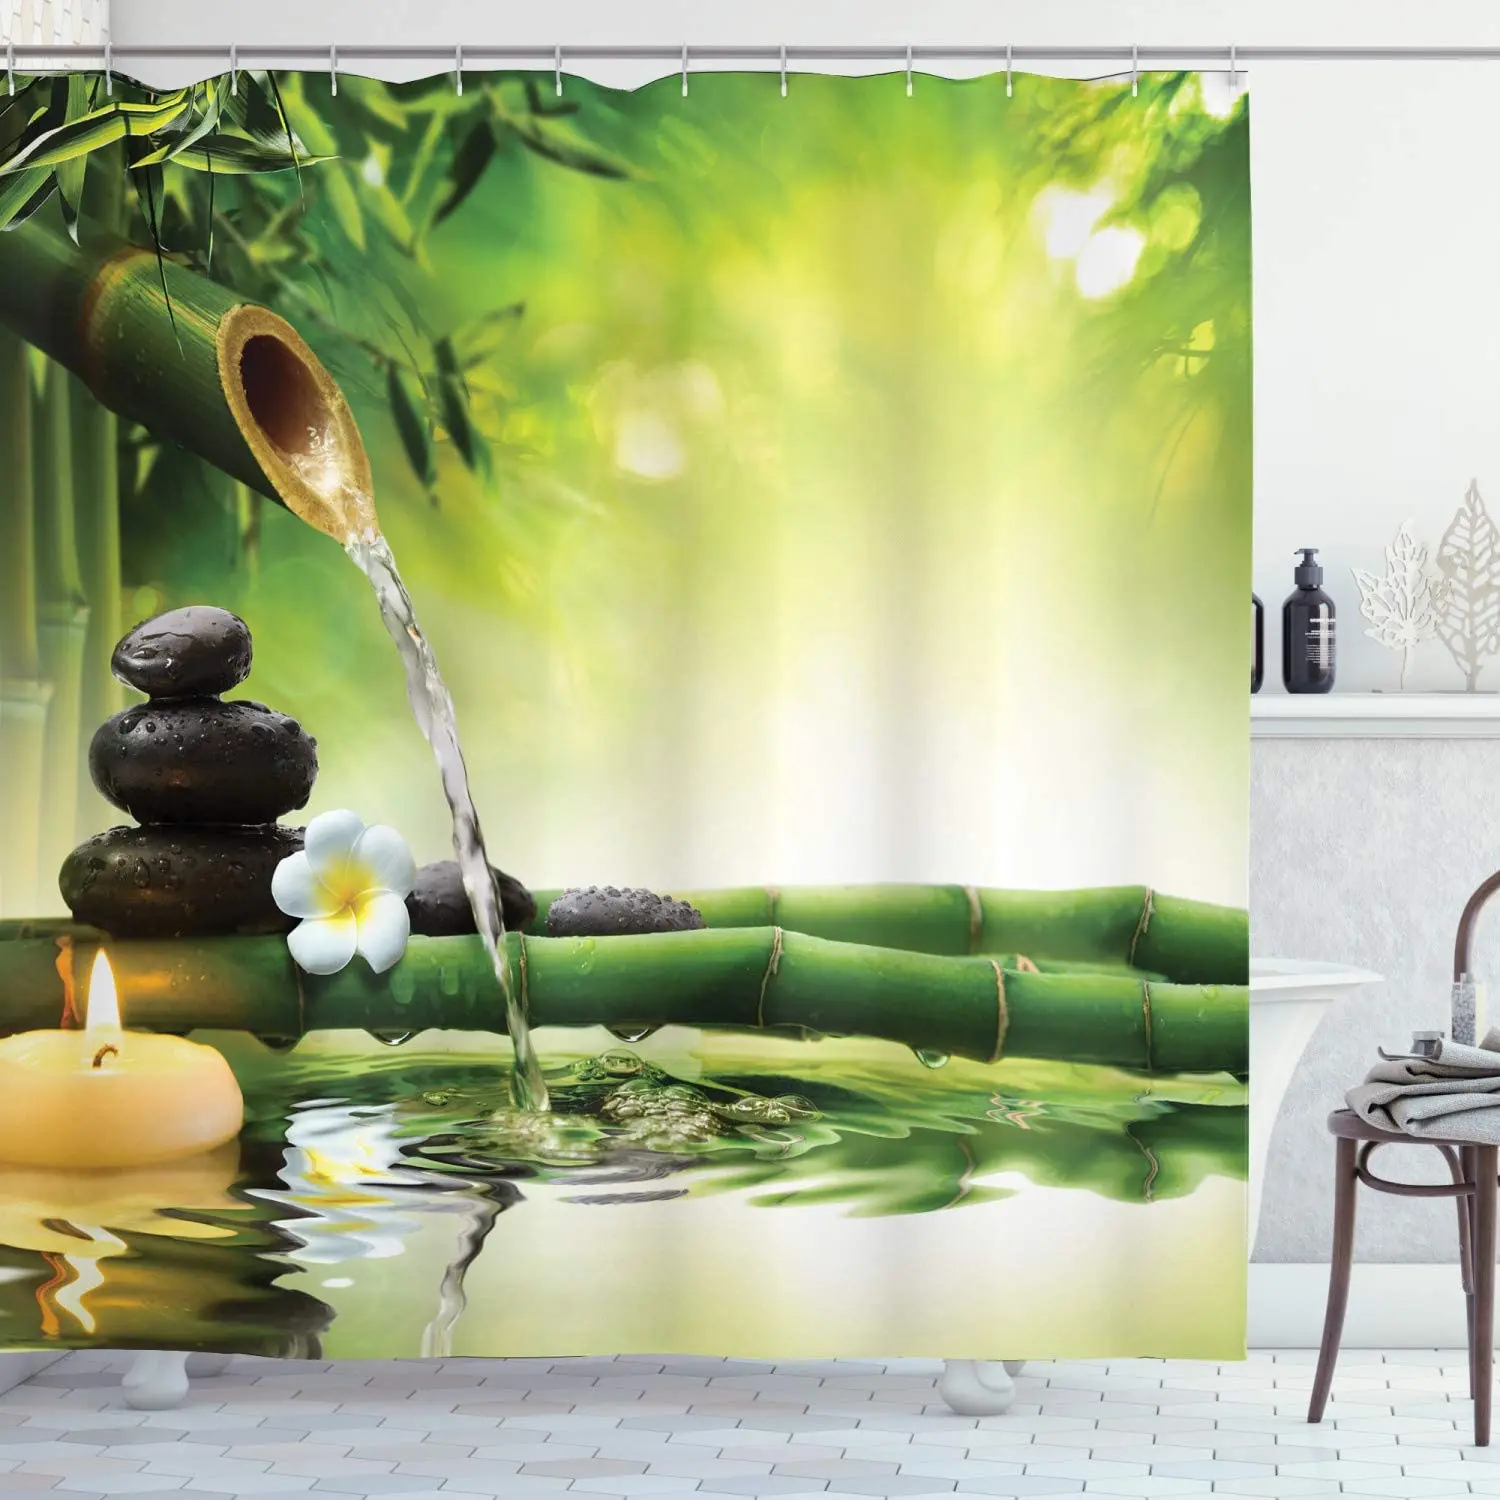 

Spa Shower Curtain, Meditation and Picture of Bamboo Stalks Candle and Basalt Stones Theraphy Relaxing, Cloth Fabric B